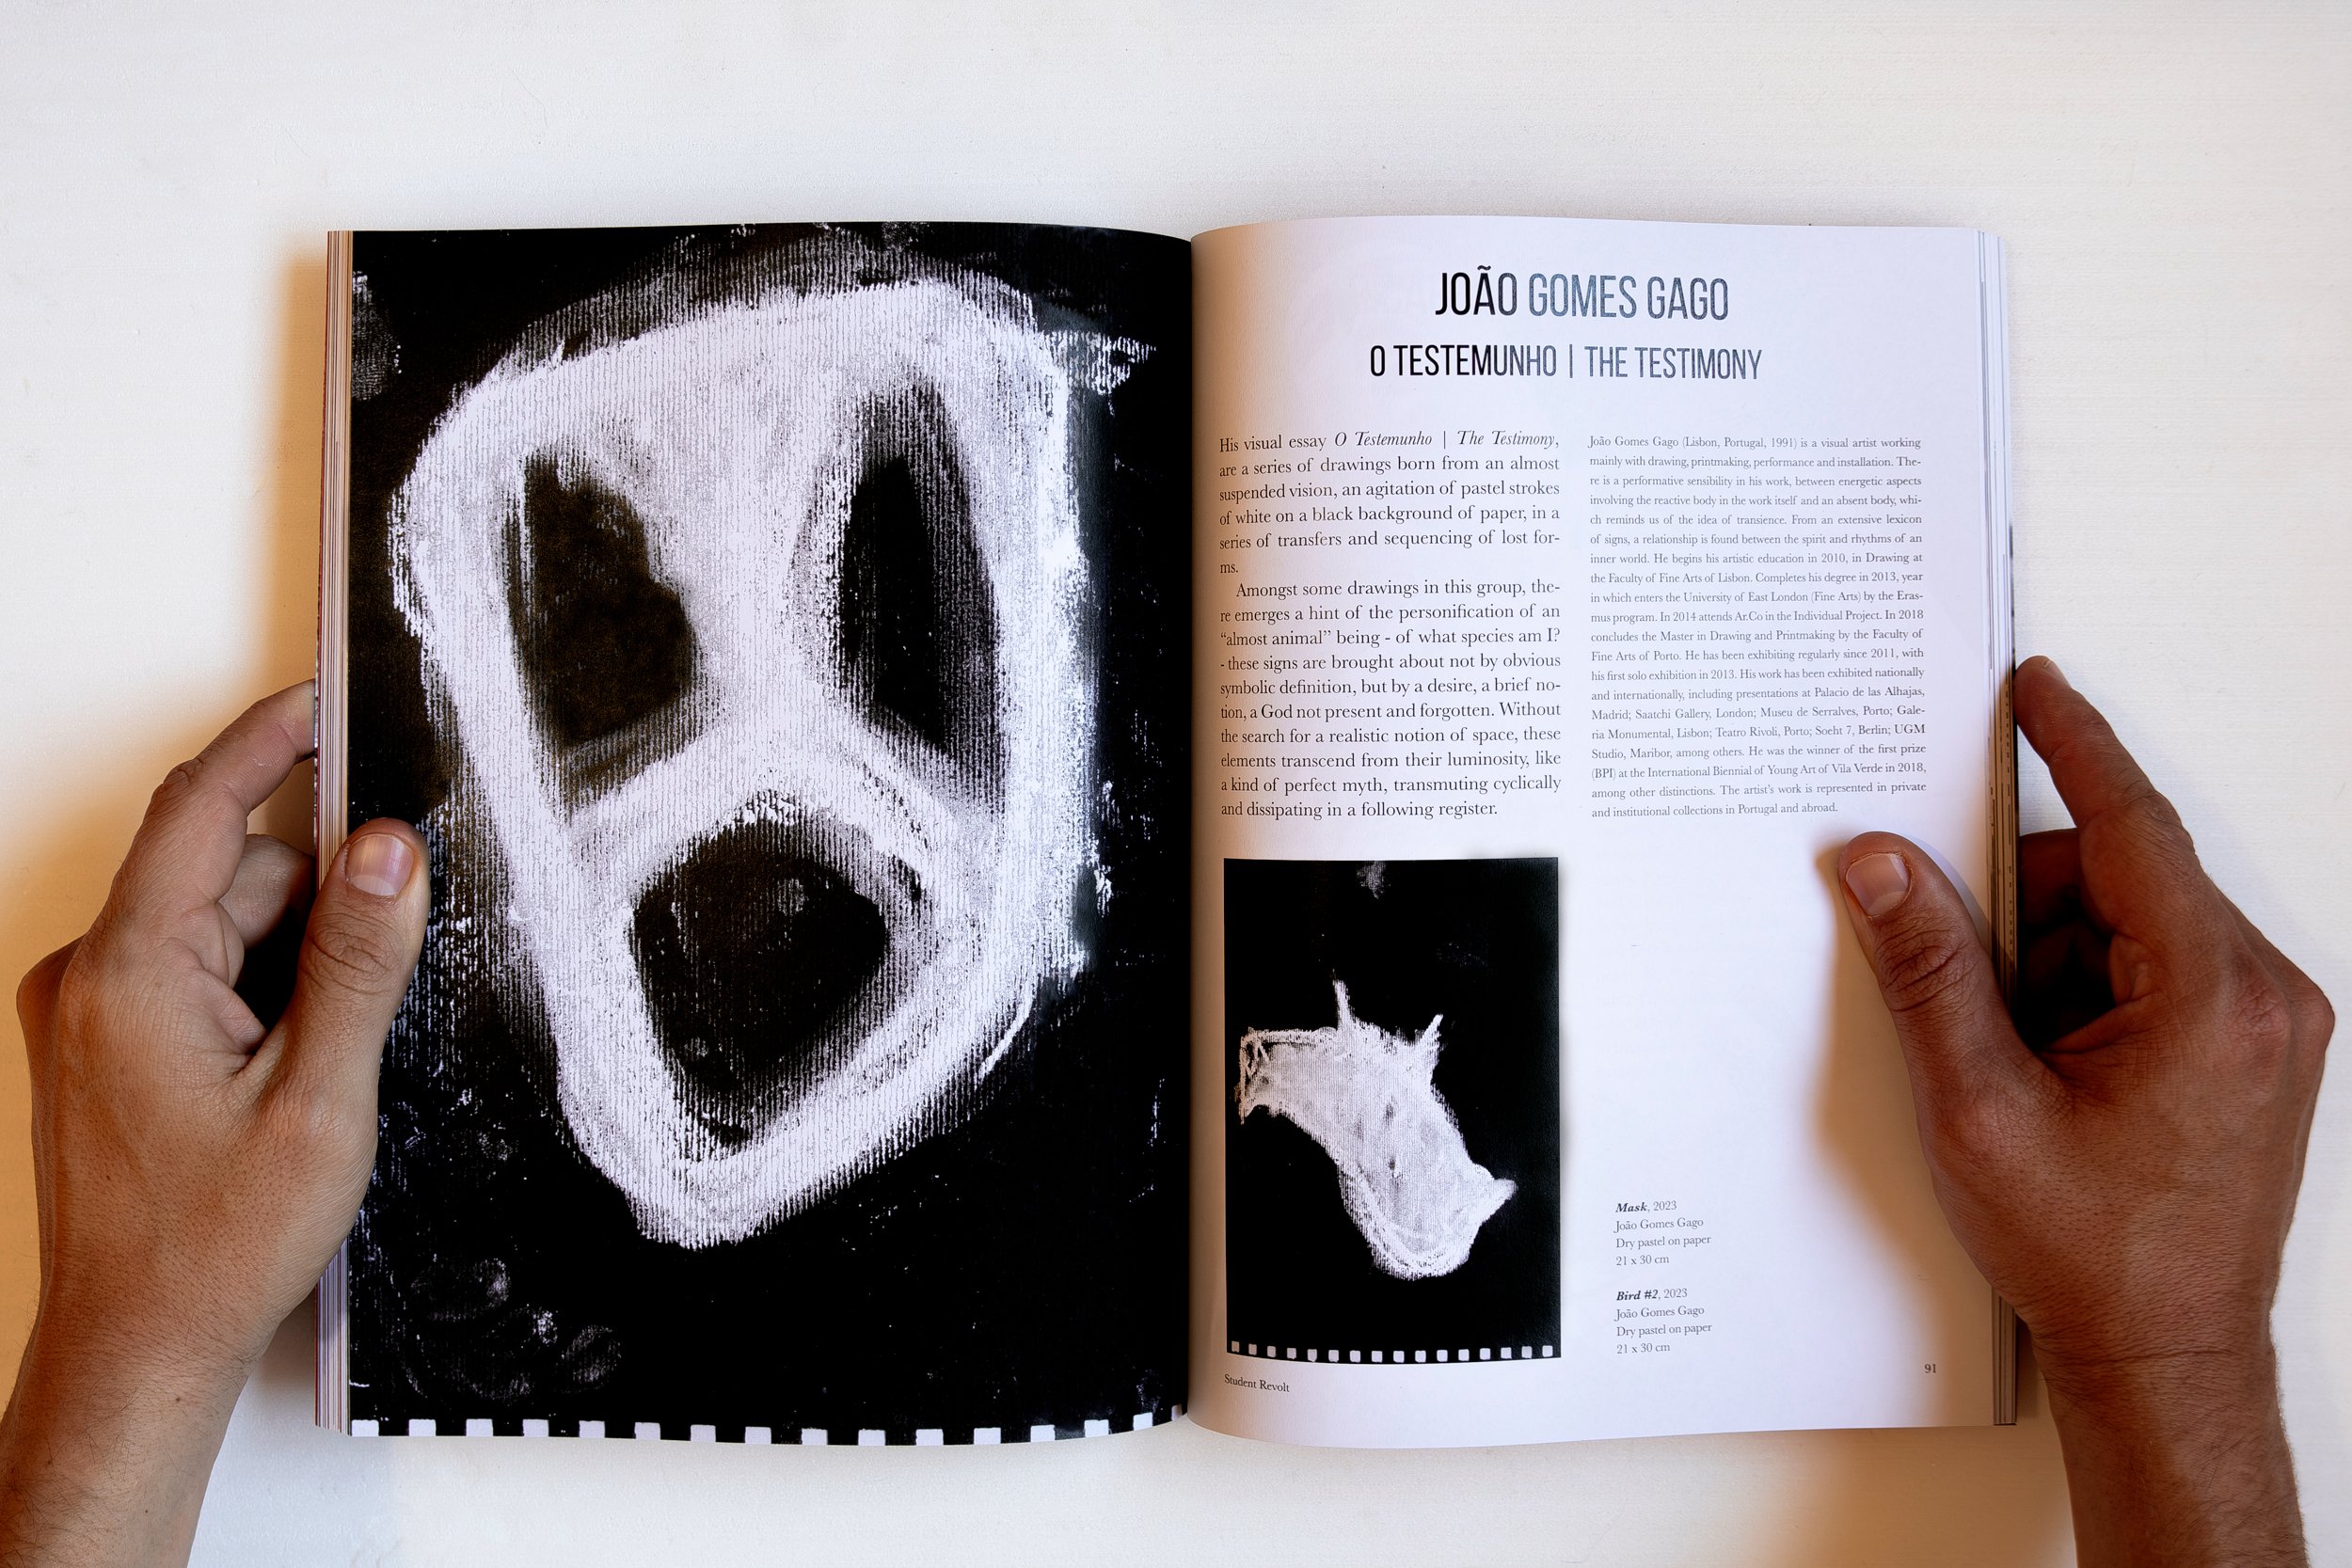 Pages with visual essay by João Gomes Gago, with his hands holding the magazine_FITA vol IV.jpg